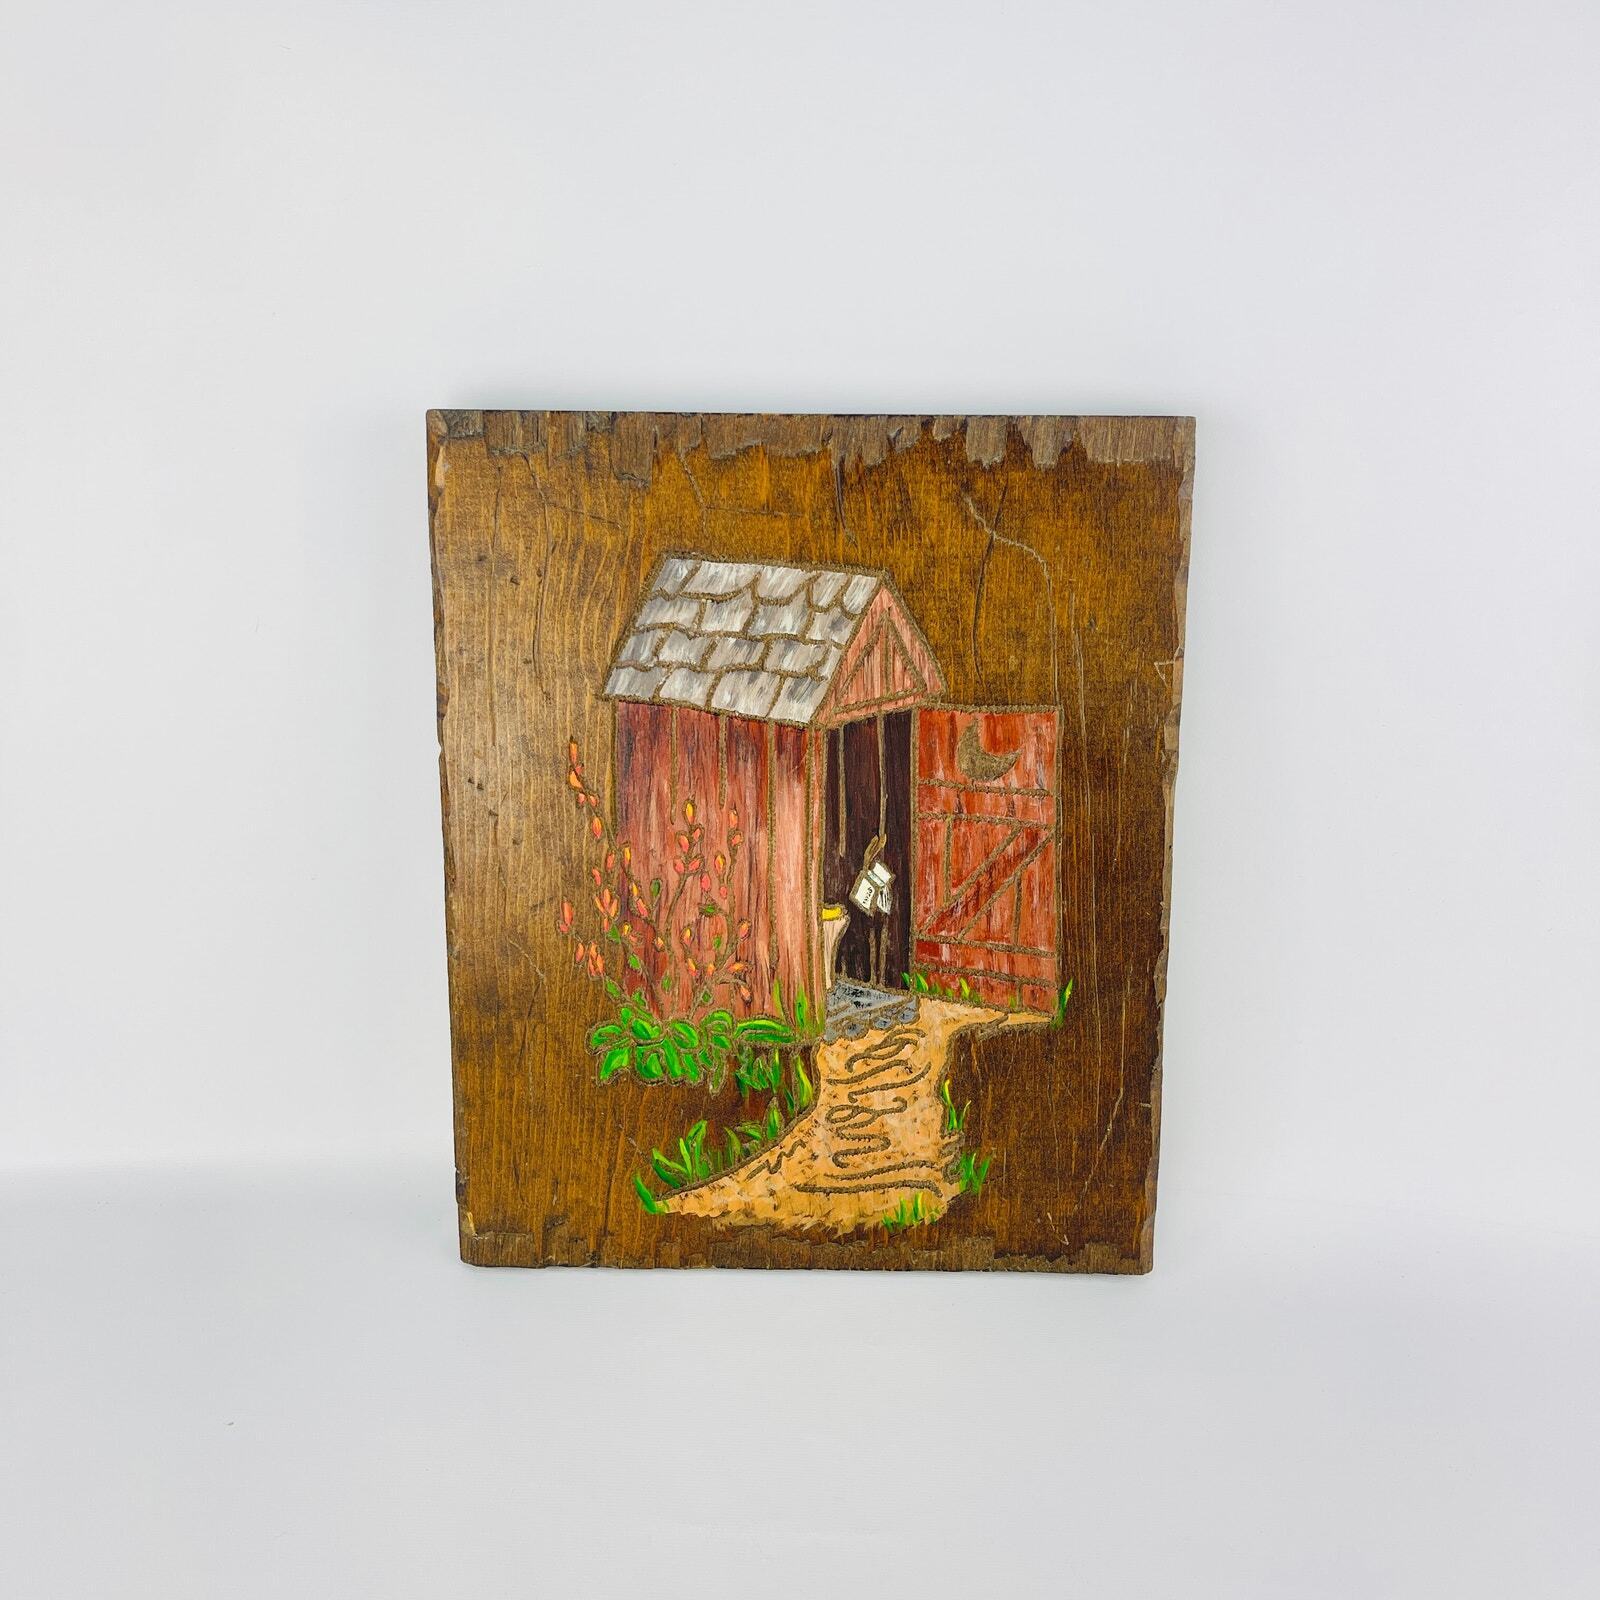 Handcrafted Carved Outhouse Country Art Plaque 12 1/8 x 10 1/8”